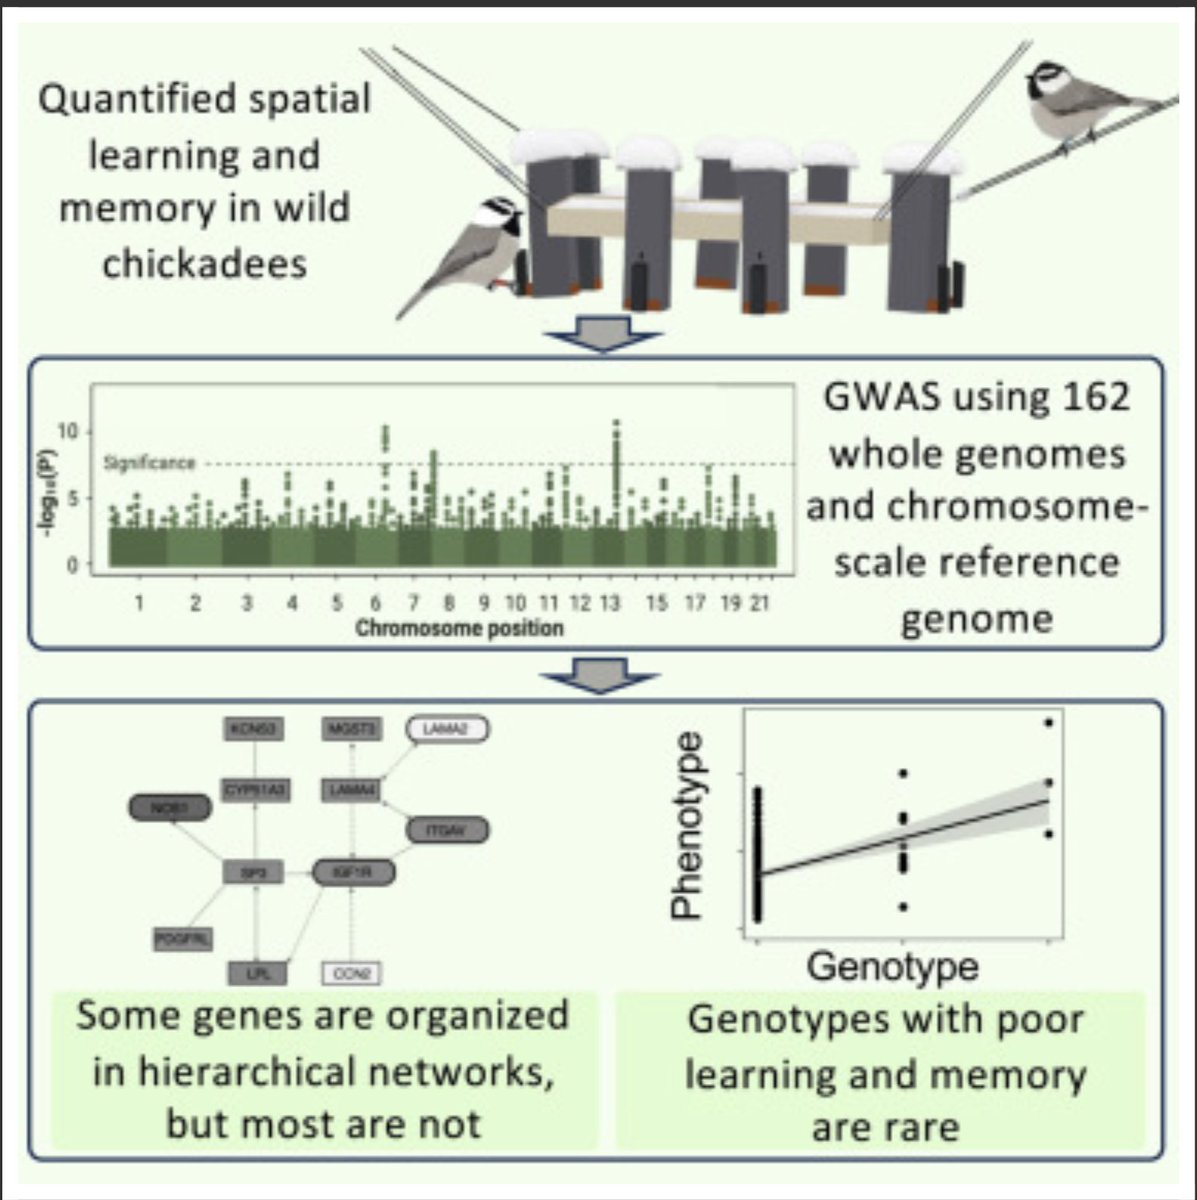 New paper in @CurrentBiology from our collaboration with @Dr_Scott_Taylor on genetics of variation in spatial cognitive abilities in food-caching chickadees. New reference genome, 162 full genomes. cell.com/current-biolog…